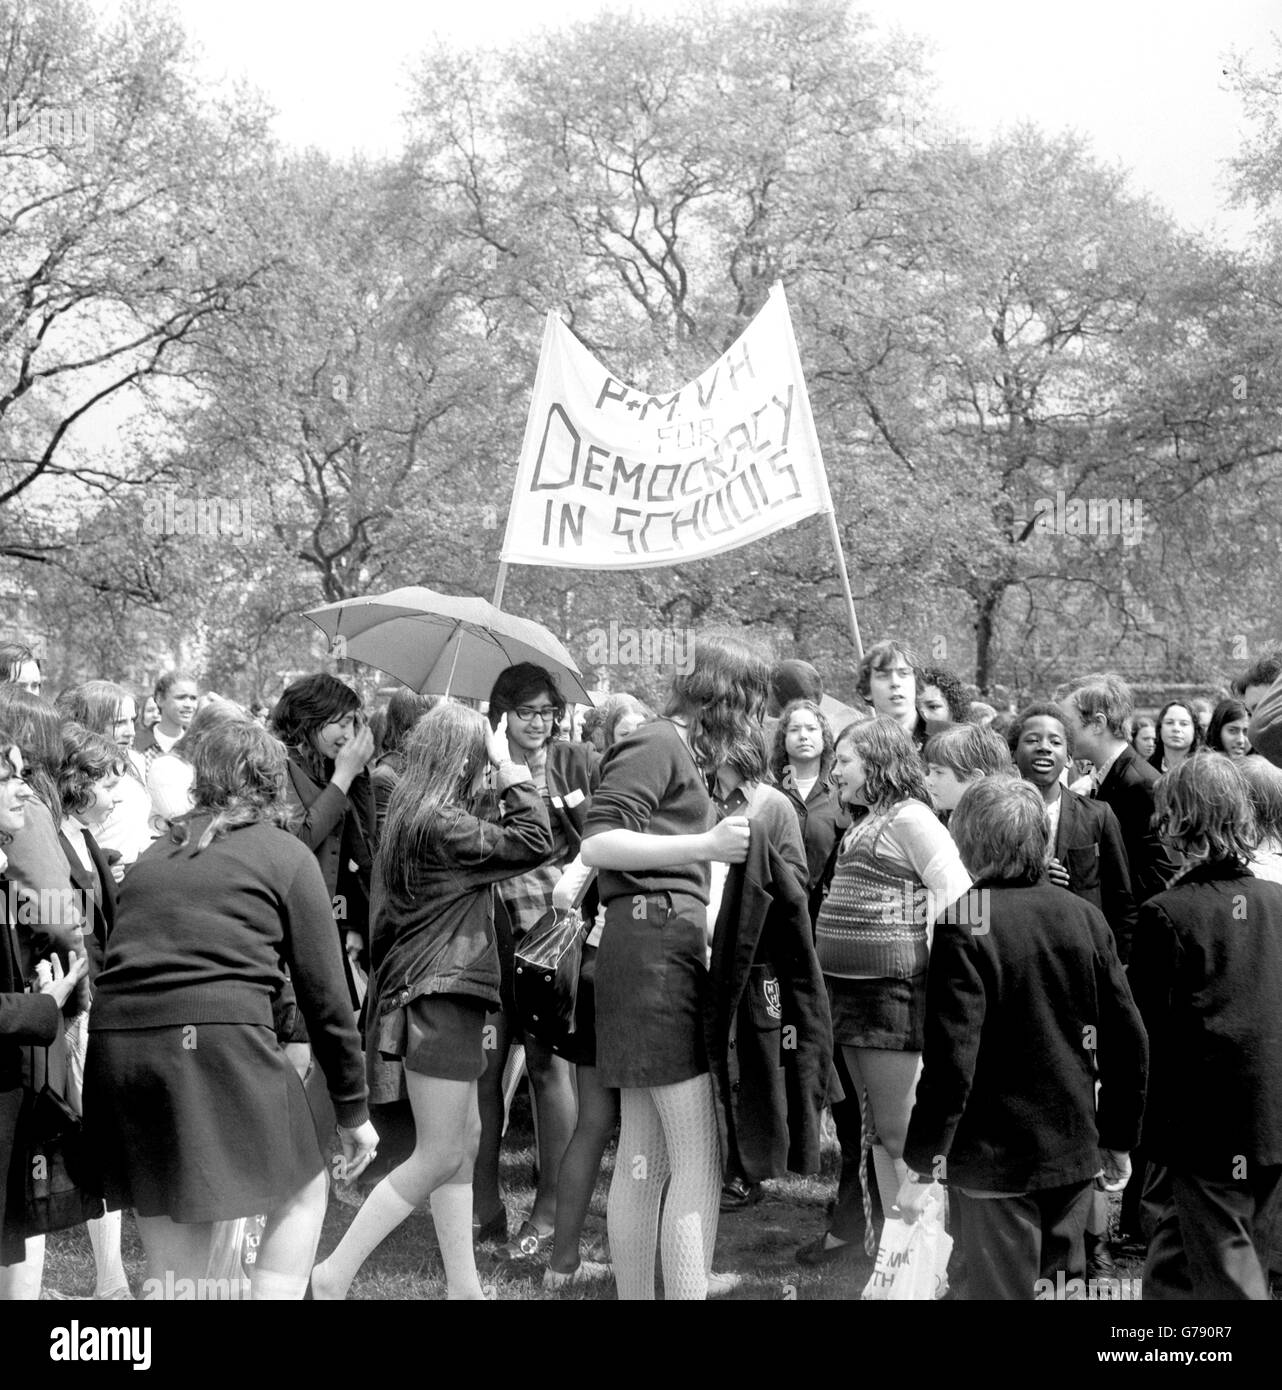 A group of schoolchildren hold a 'pupil power' demonstration at Speaker's Corner in Hyde Park. Children are protesting against caning, detention, uniforms and headmaster dictatorship. Stock Photo